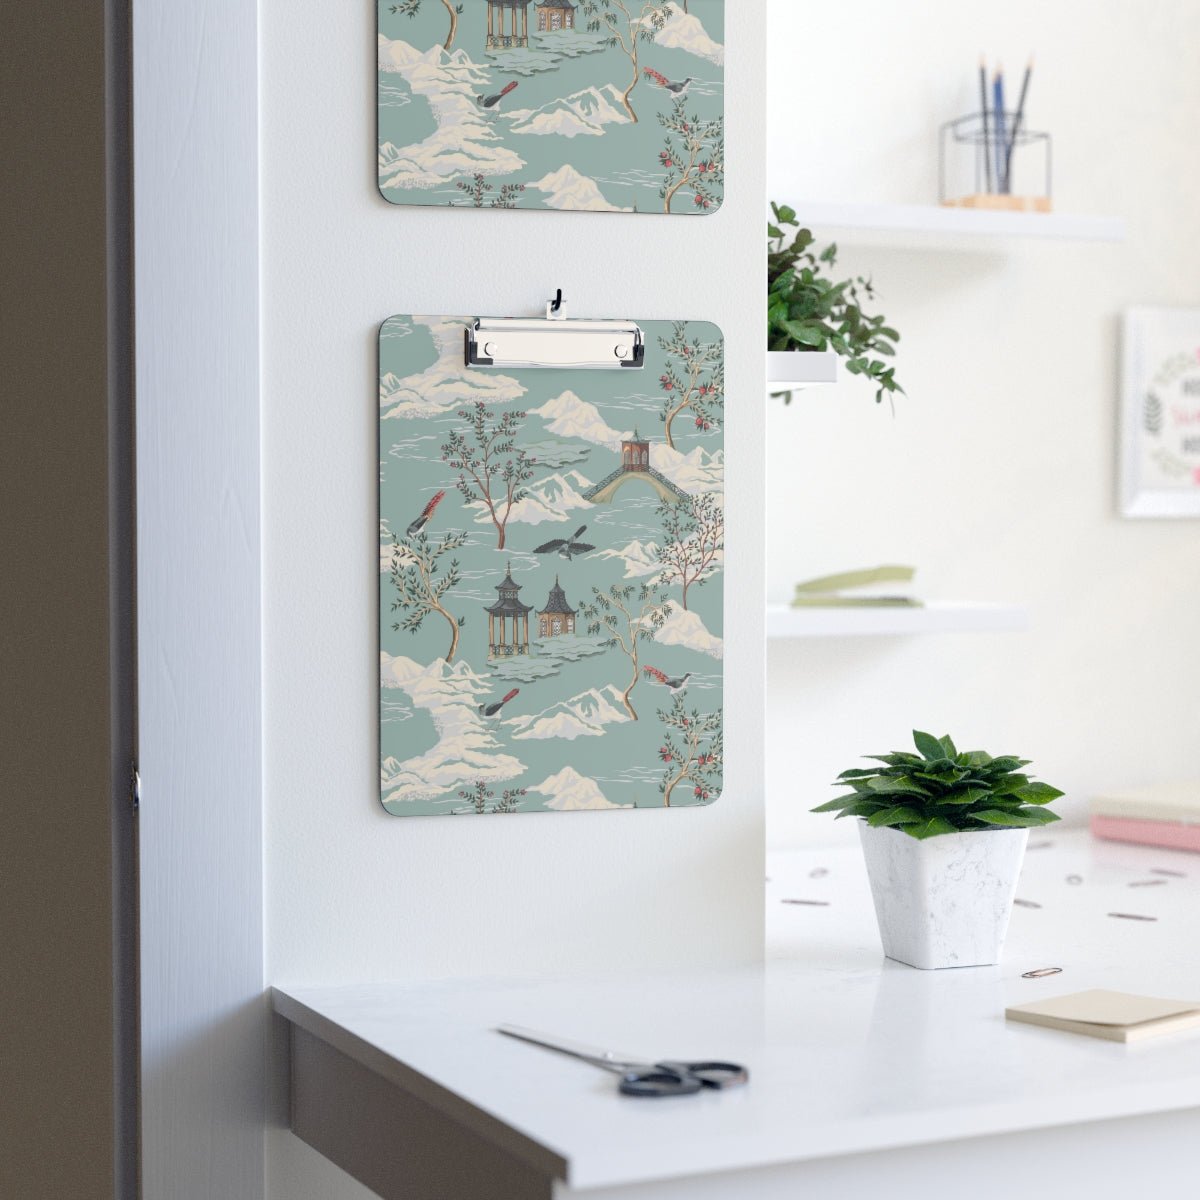 Chinoiserie Chinese Pagoda Clipboard - Puffin Lime